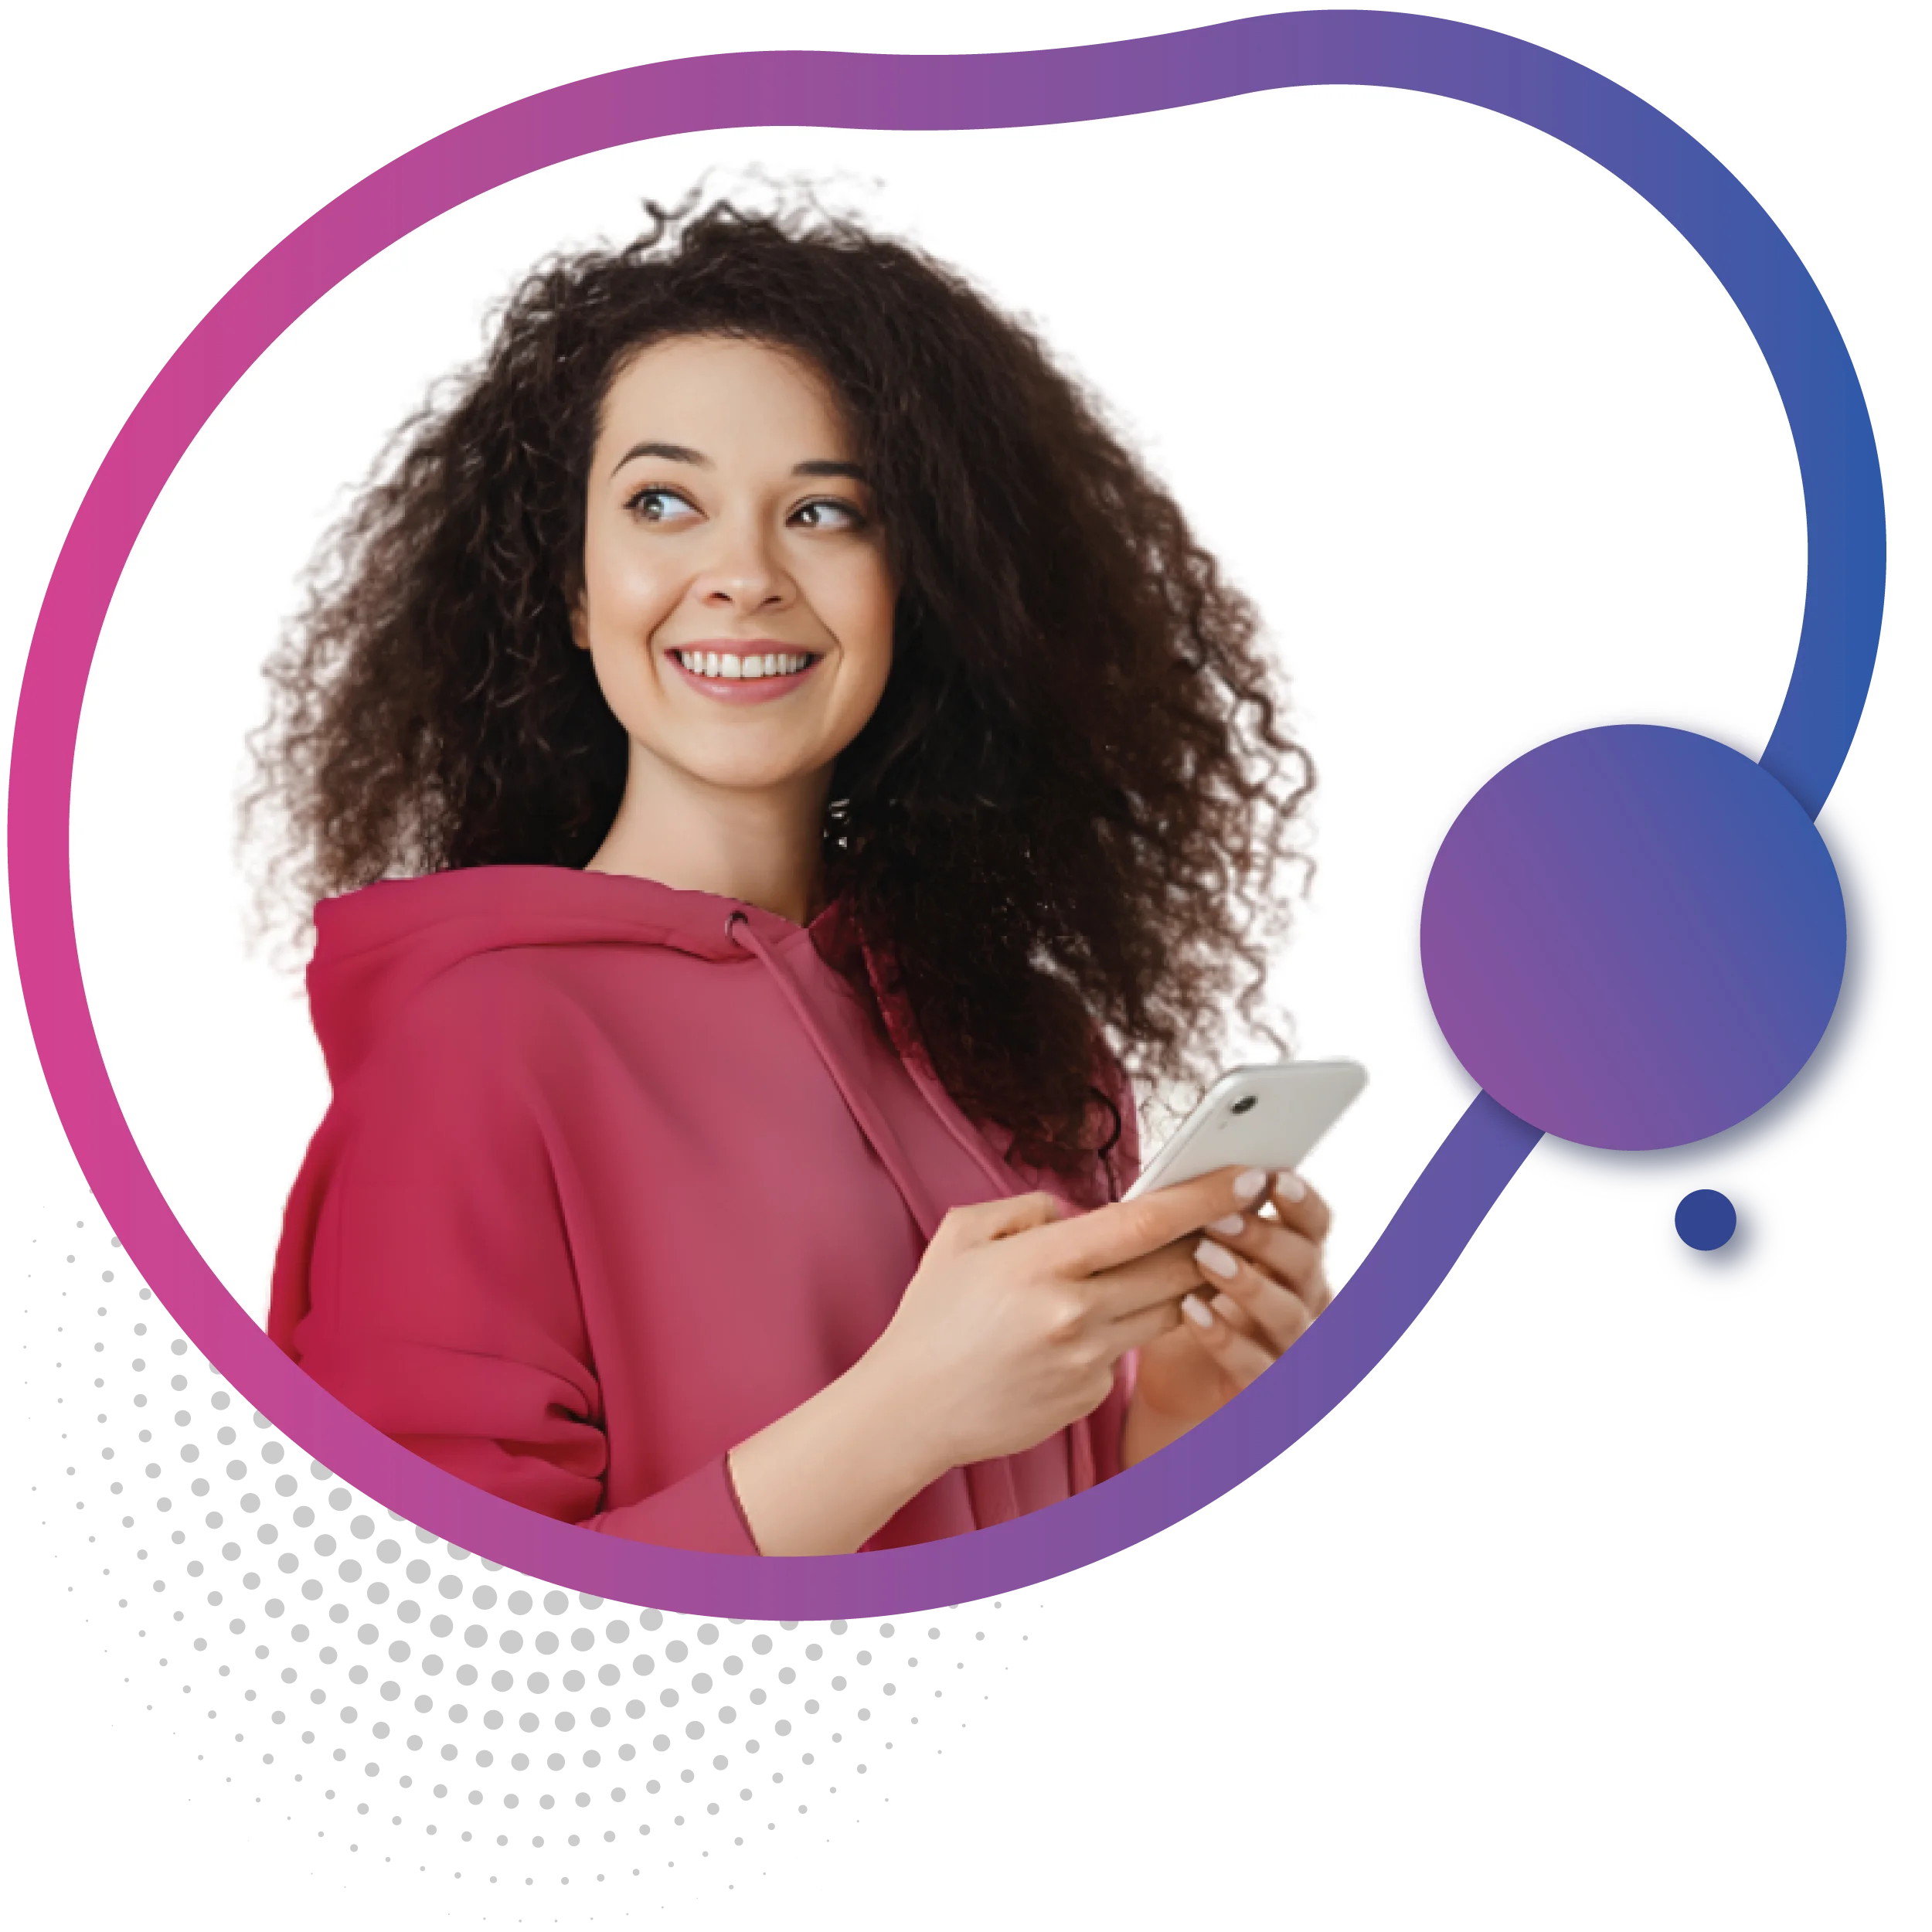 A girl holding a smartphone with a smiling face using Australia's best eSIM by Telsim